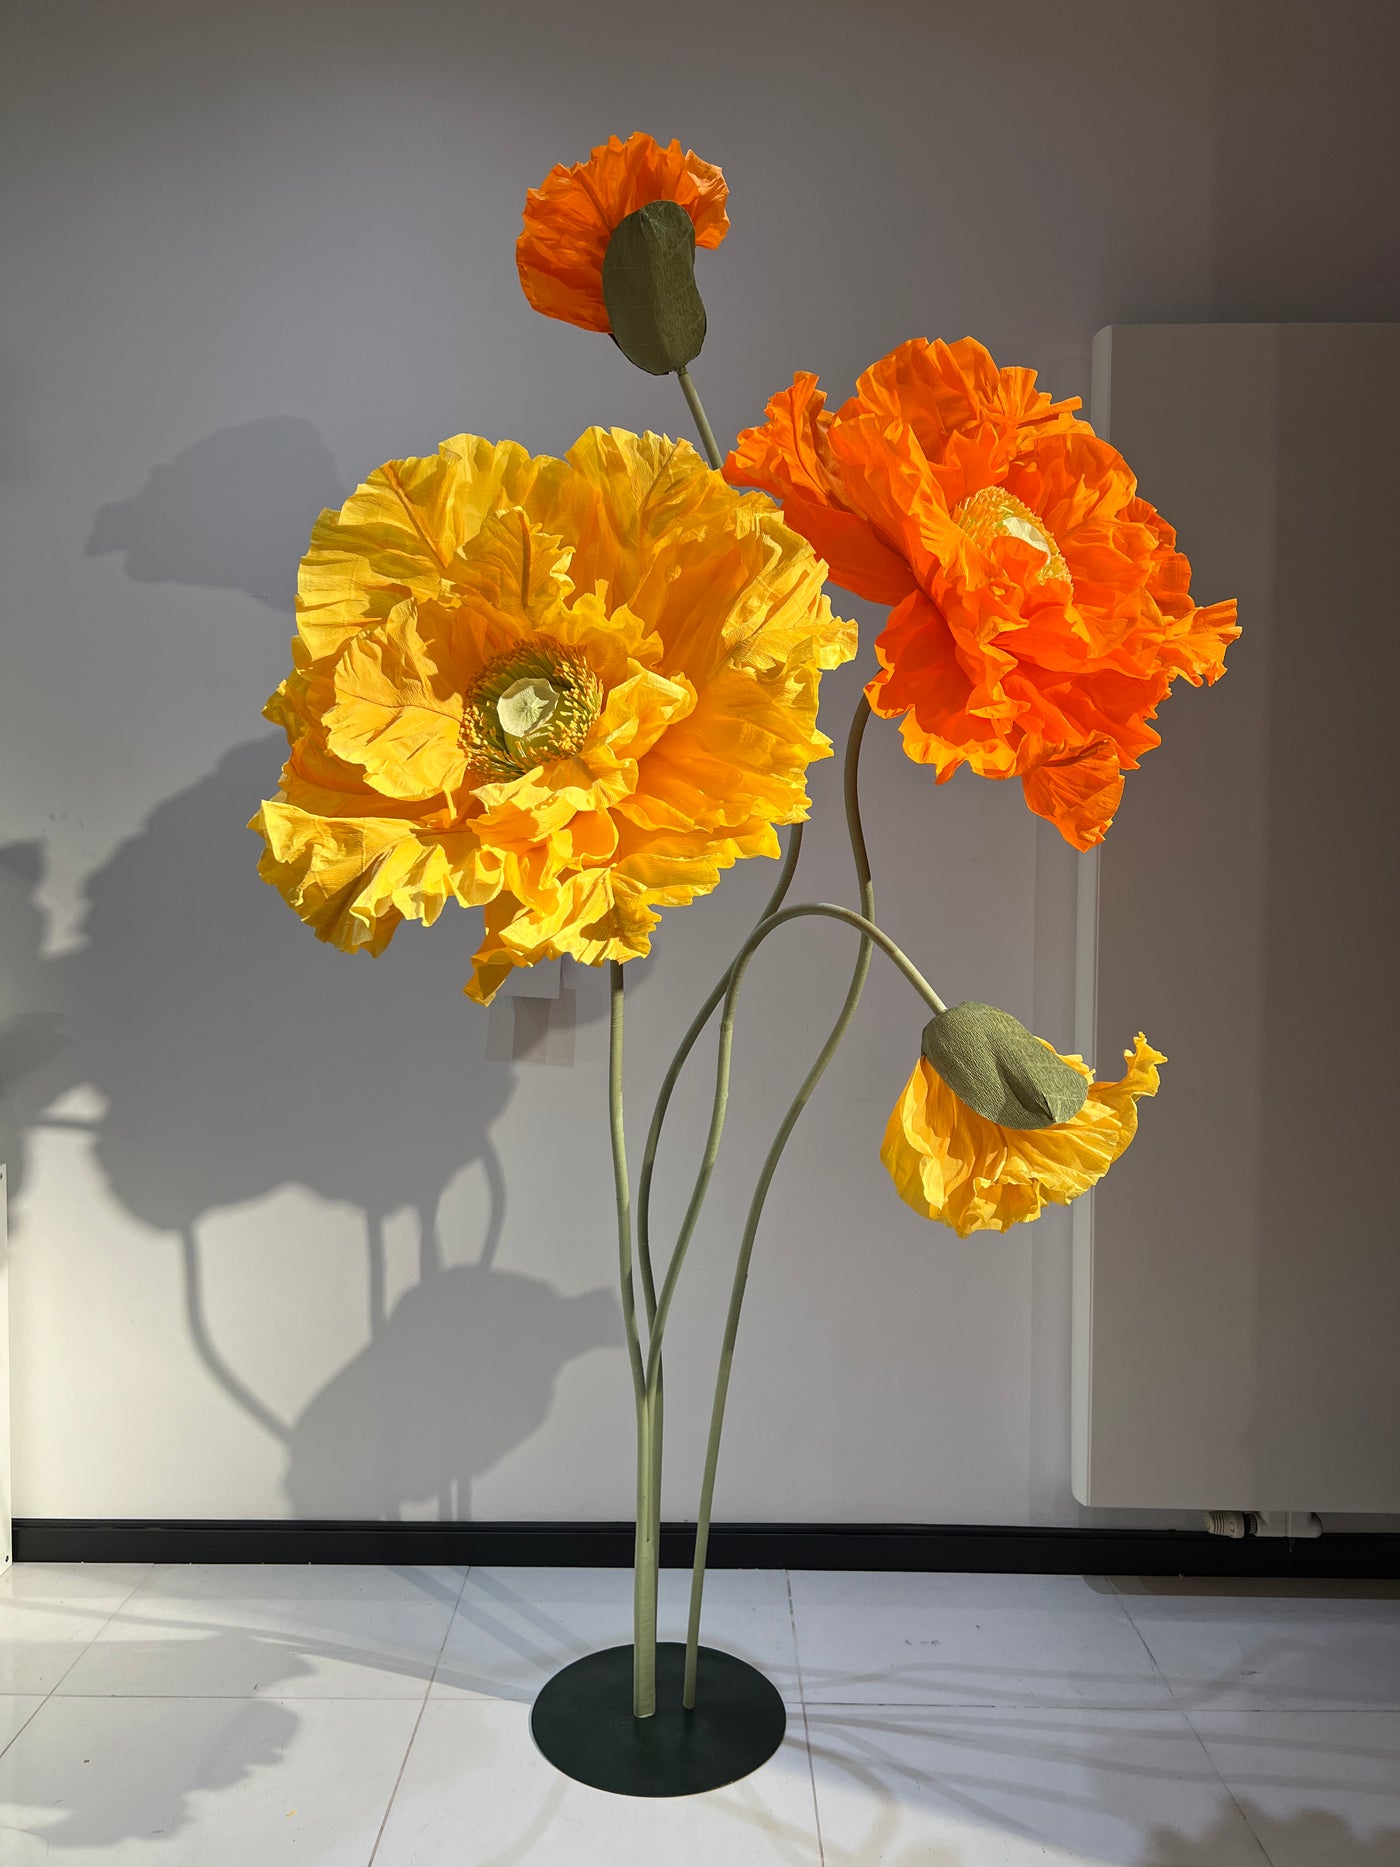 Giant Paper Poppies for Halloween Decor